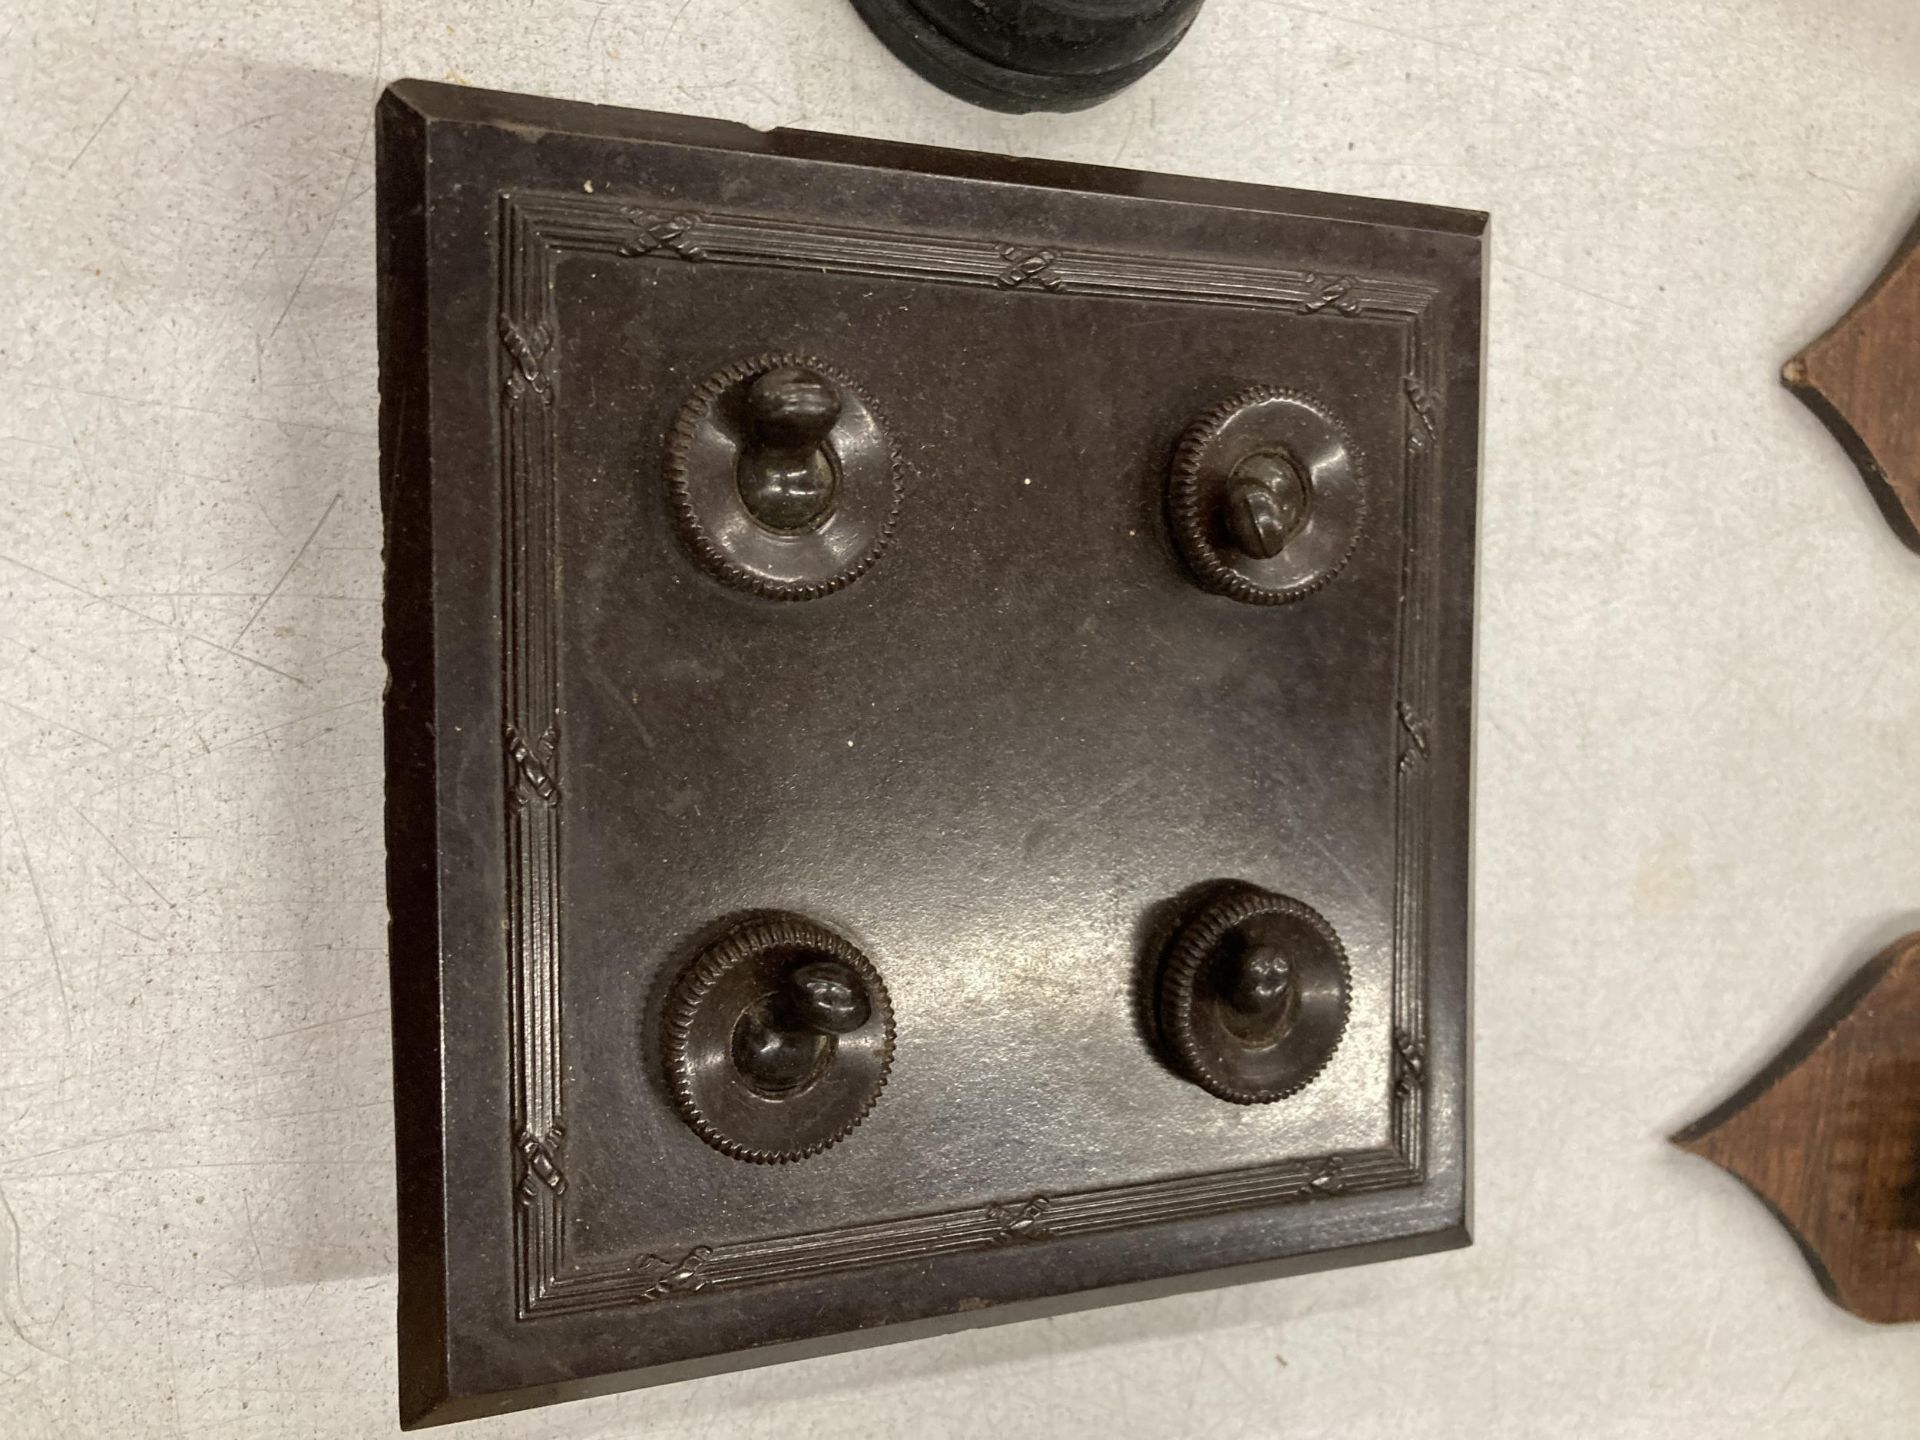 AN ART DECO 4 GANG LIGHT SWITCH AND BELL PUSH - Image 3 of 3